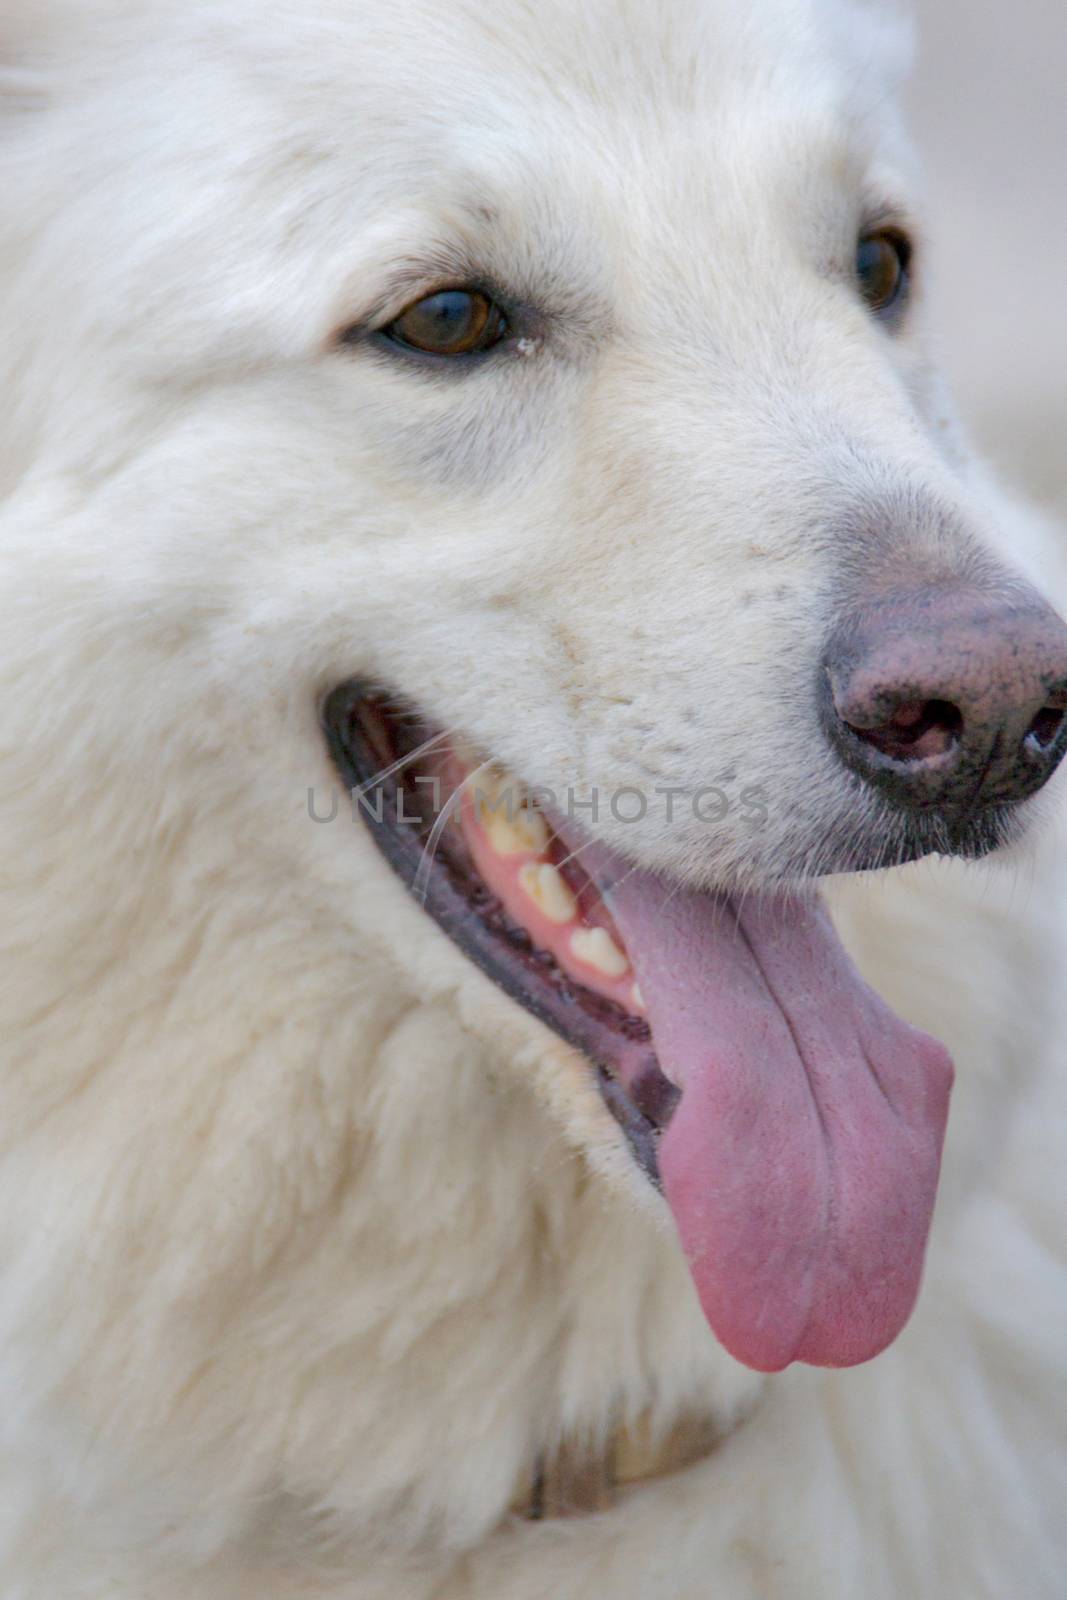 The face of a White Swiss Shepherd.